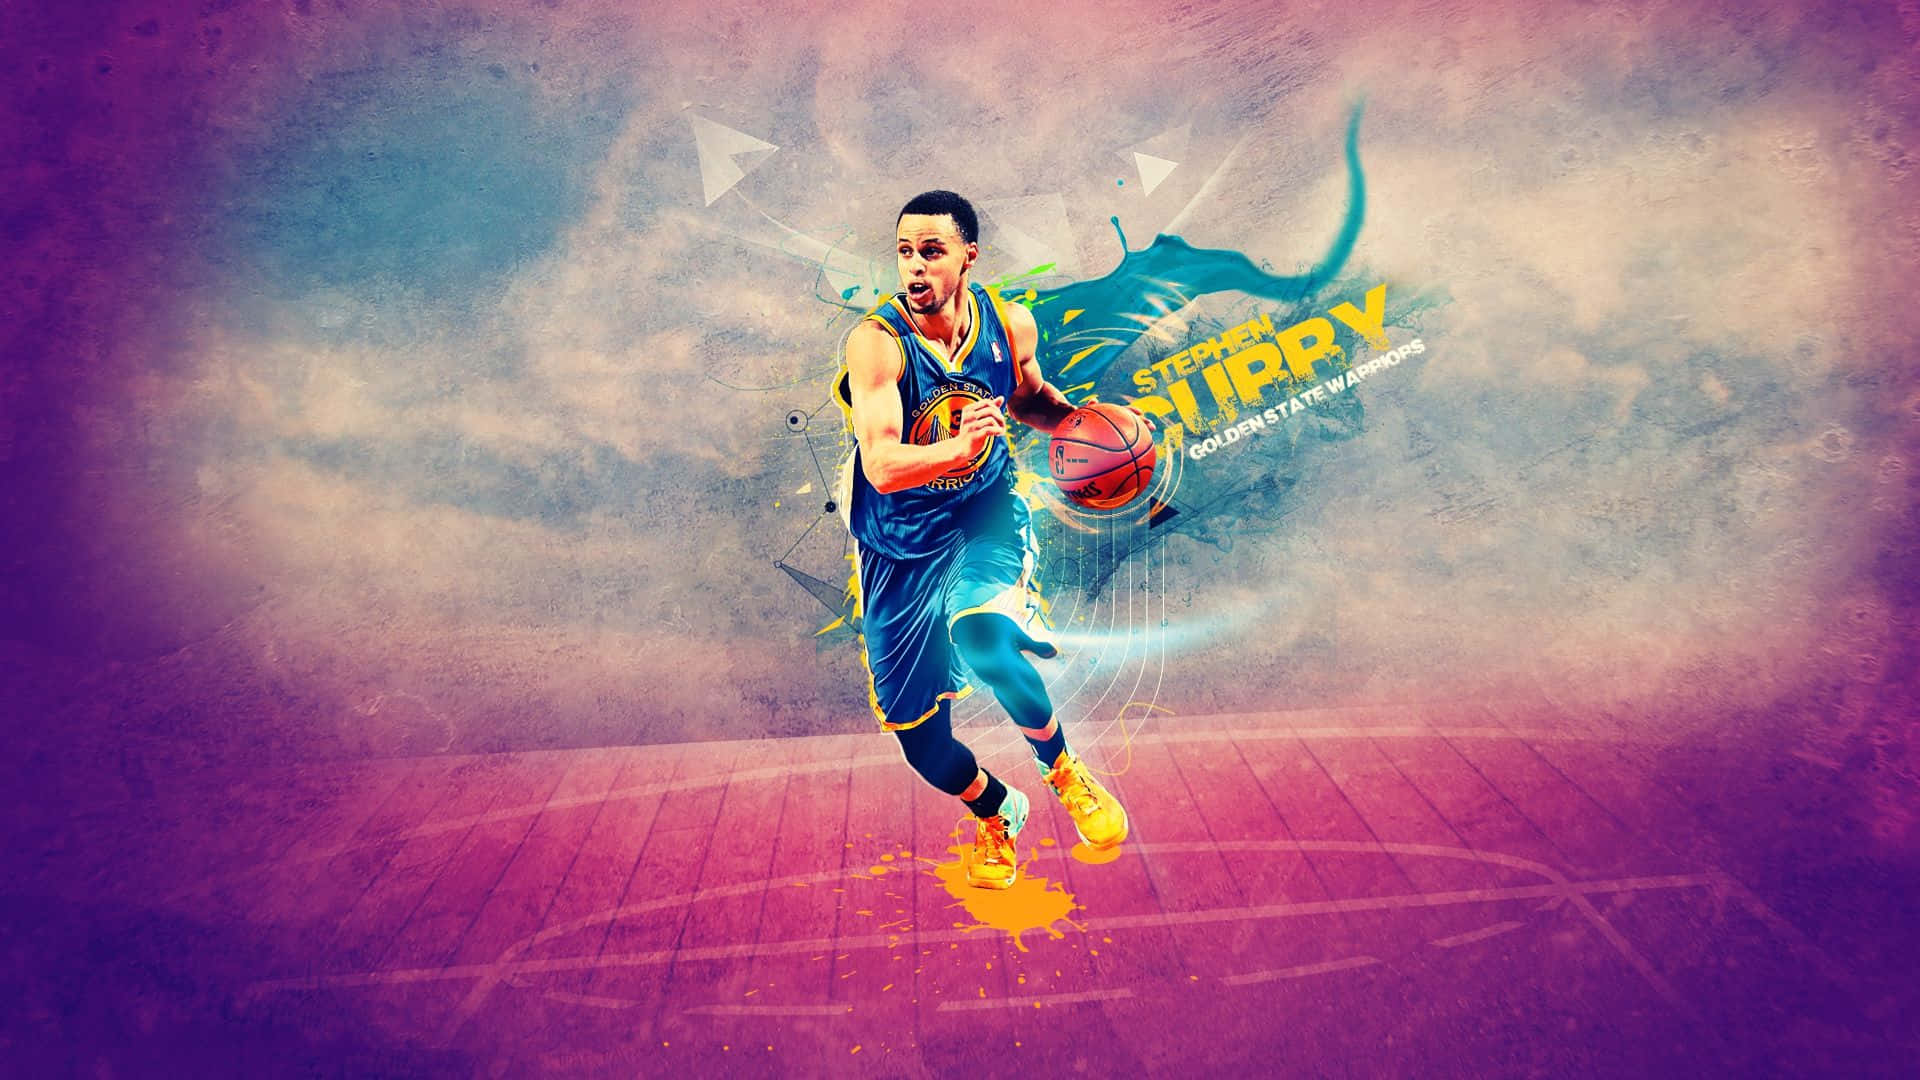 Stephen Curry Looks Cool During A Basketball Dunk Background